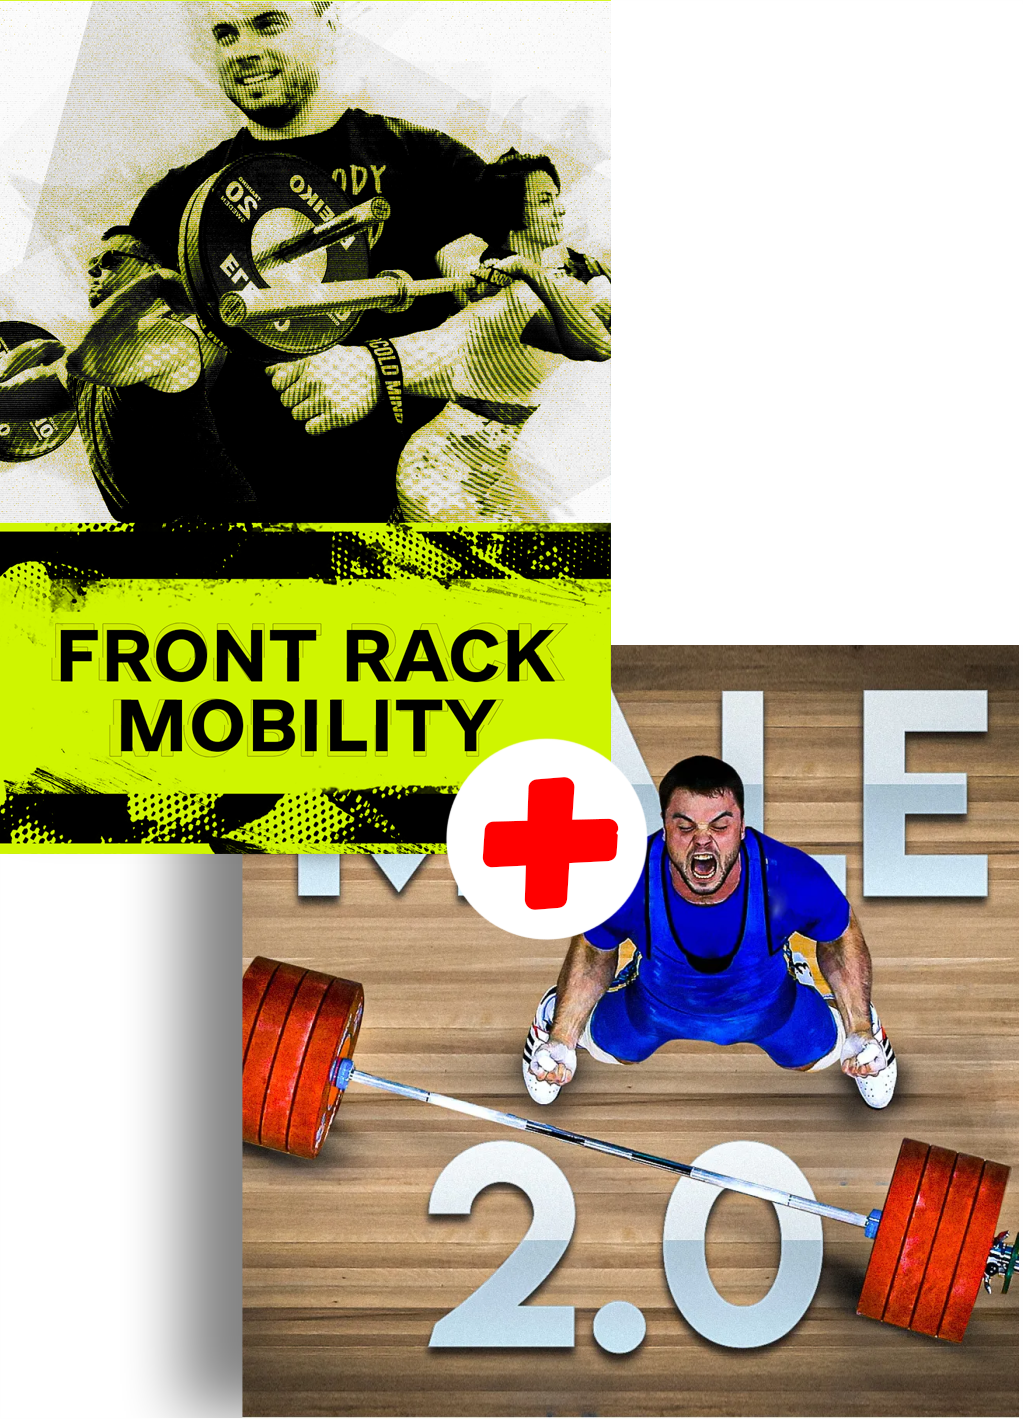 mobility routine for lifters